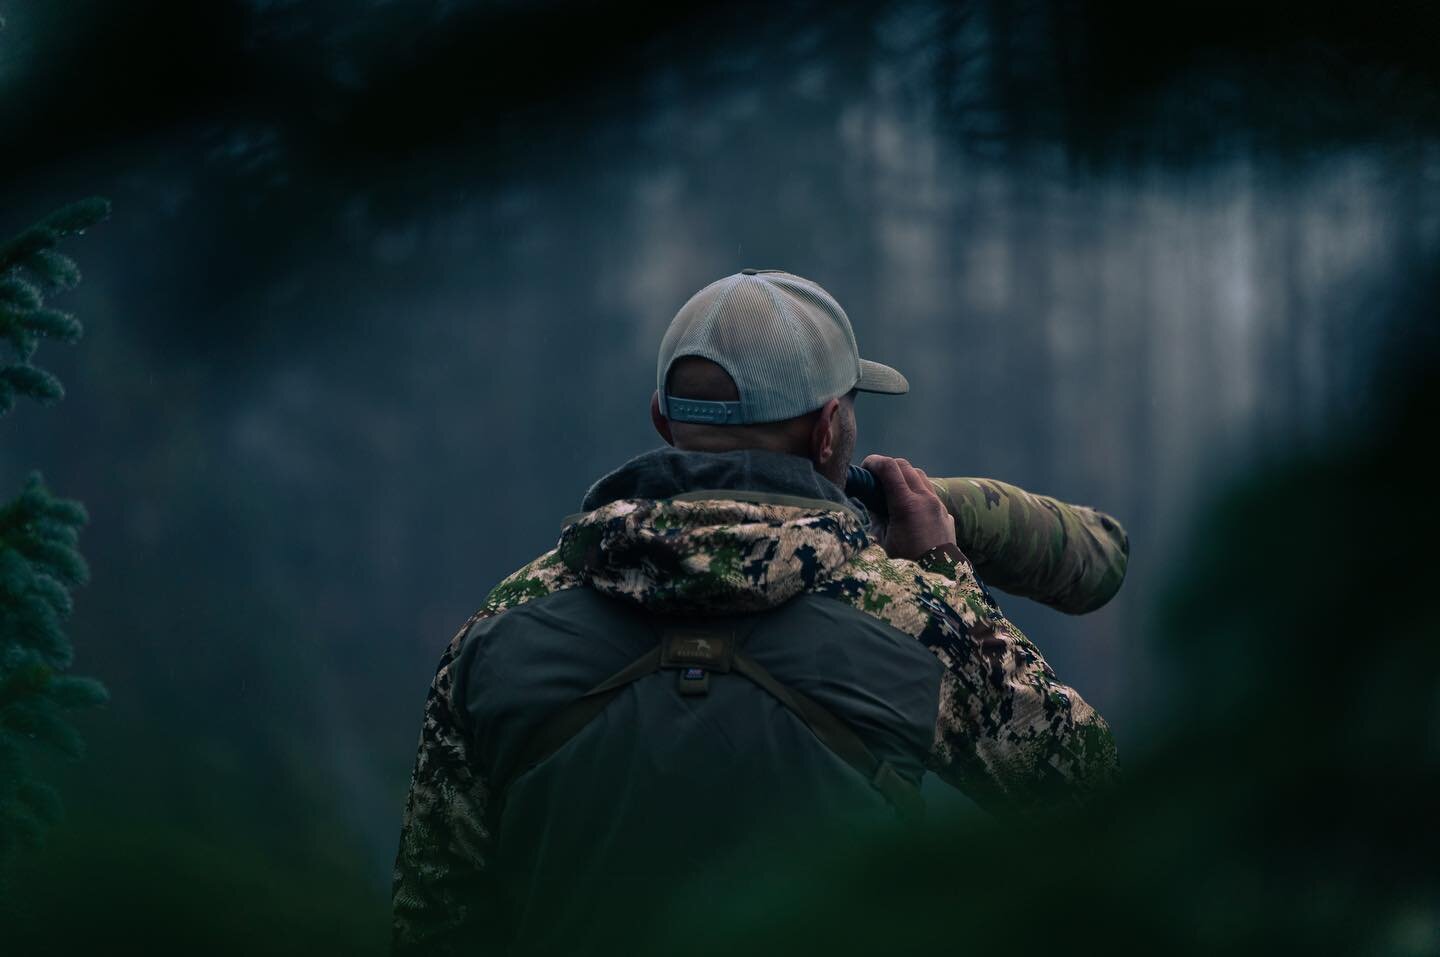 In September I had the pleasure of going on my first ever archery elk hunt&hellip; with a camera. Led by two long time hunting partners, Clint and Cody, I got to see early morning backcountry beauty, experience cold, dark, and near silent hikes in ho